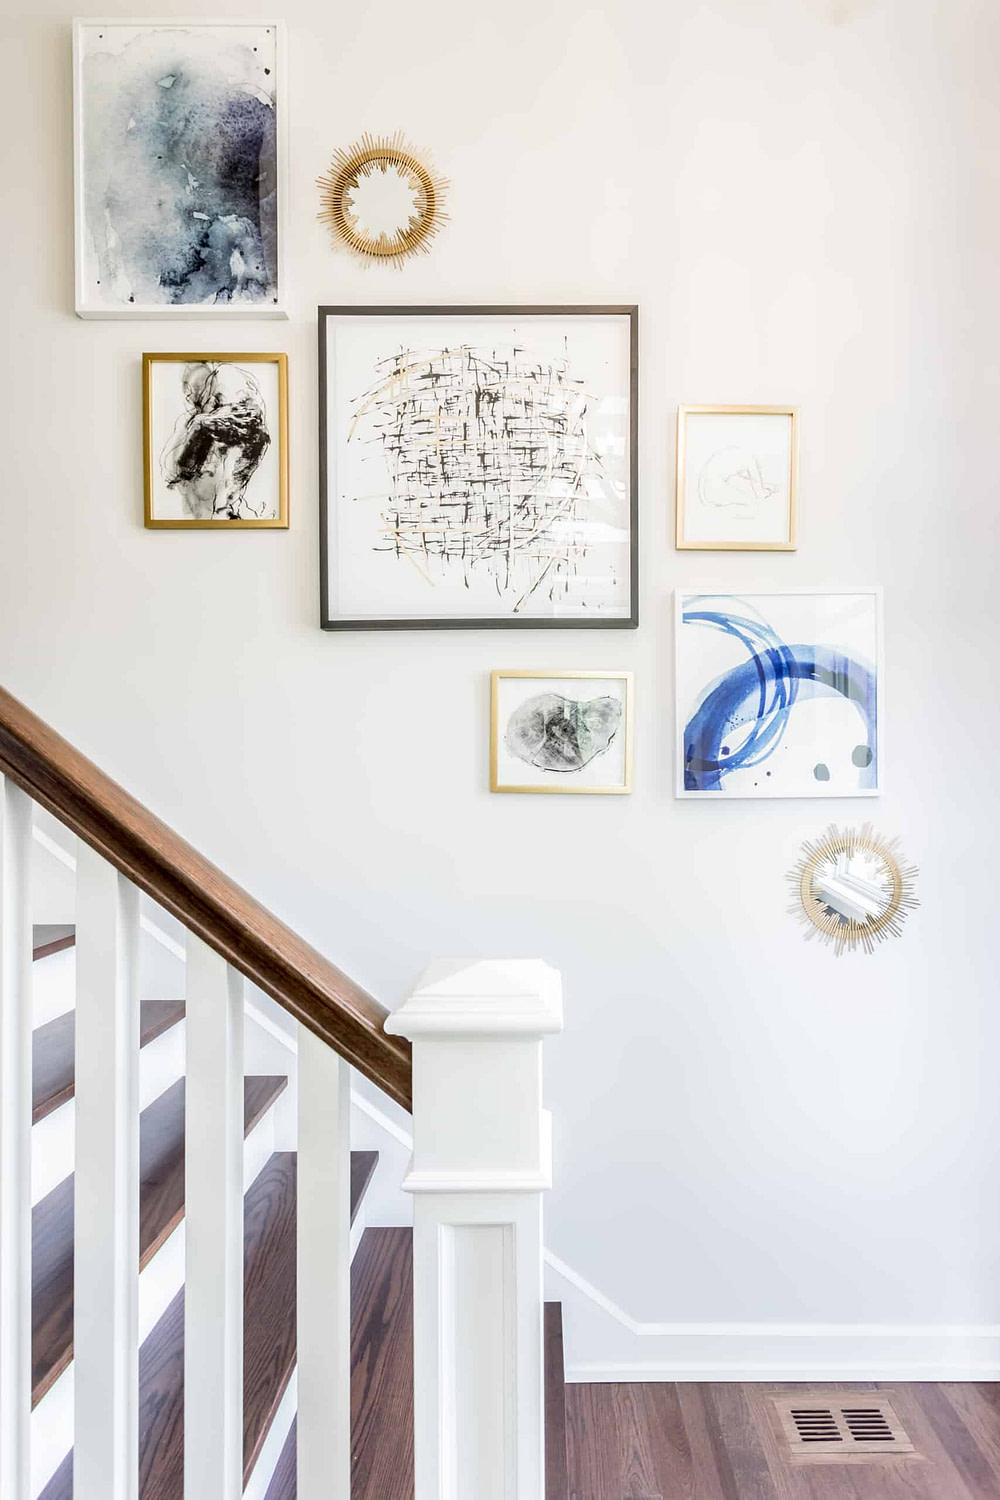 Pictures against the wall of the staircase